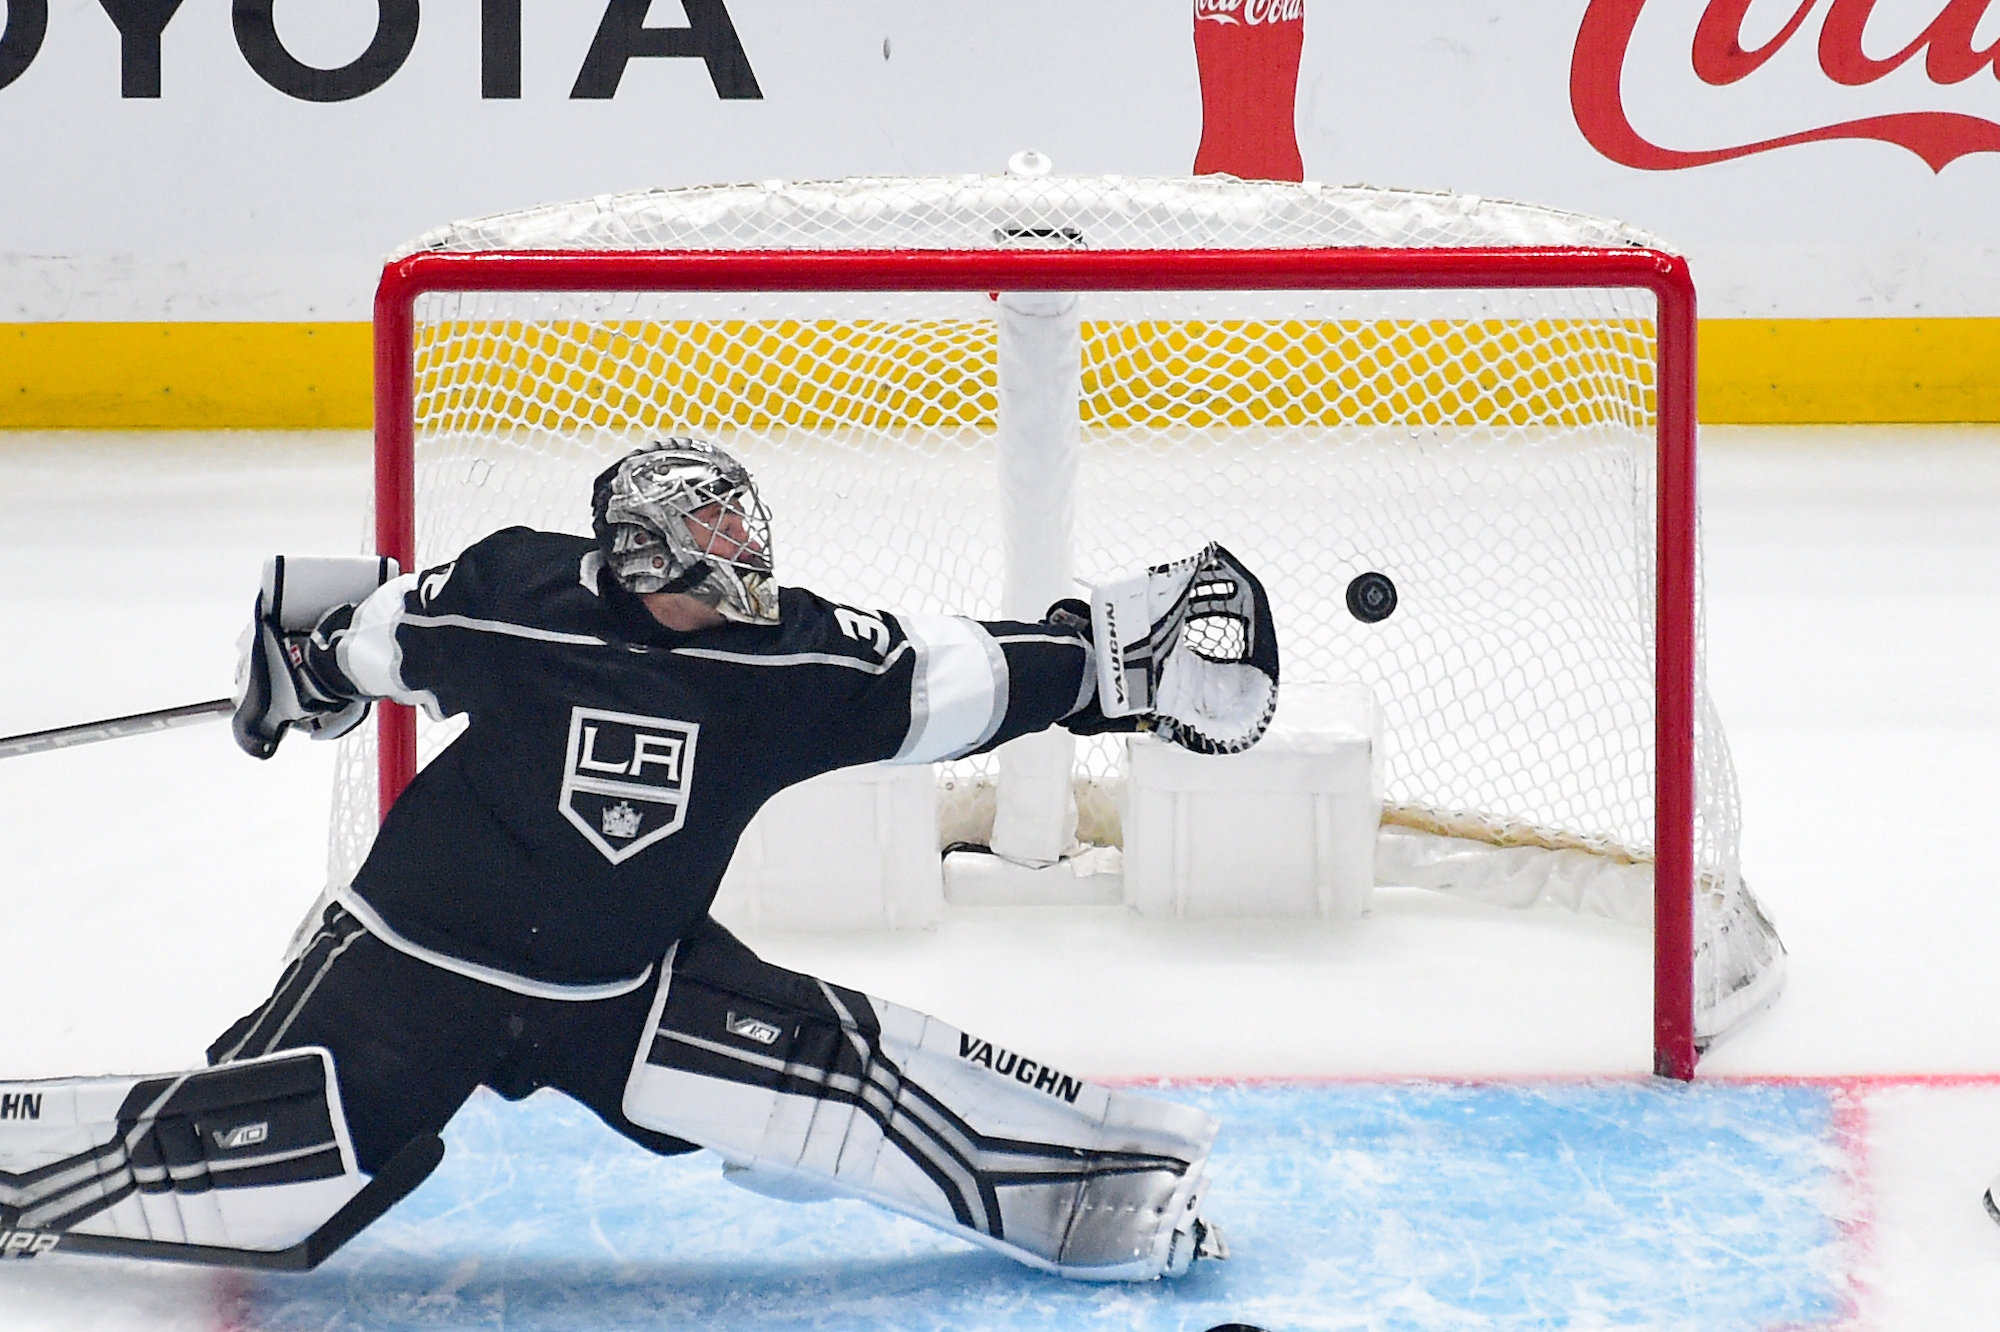 LOS ANGELES, CA - NOVEMBER 29: Jonathan Quick #32 of the Los Angeles Kings reaches for a puck that goes into the goal during the second period against the Seattle Kraken at Crypto.com Arena on November 29, 2022 in Los Angeles, California. (Photo by Juan Ocampo/NHLI via Getty Images)